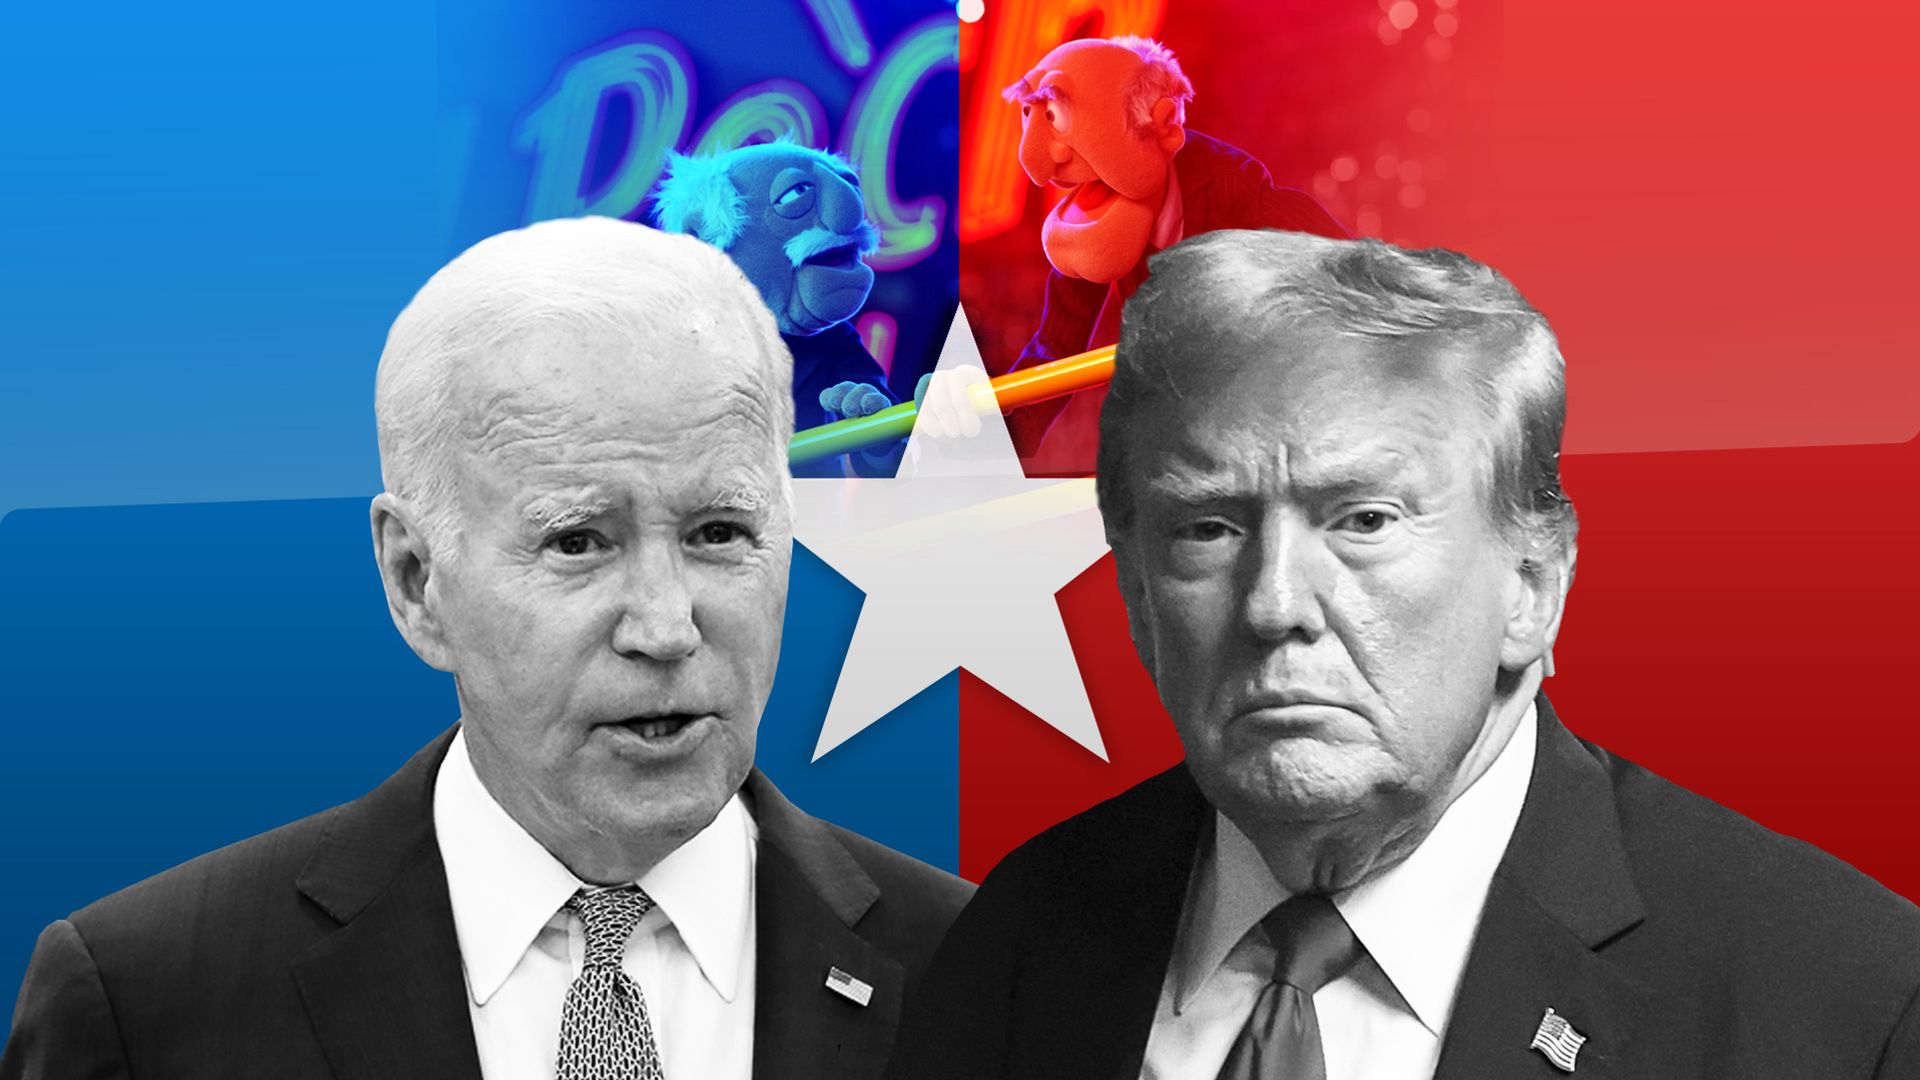 Bad sign for democracy that Biden and Trump debate compared to The Muppet Show | Adam Boulton